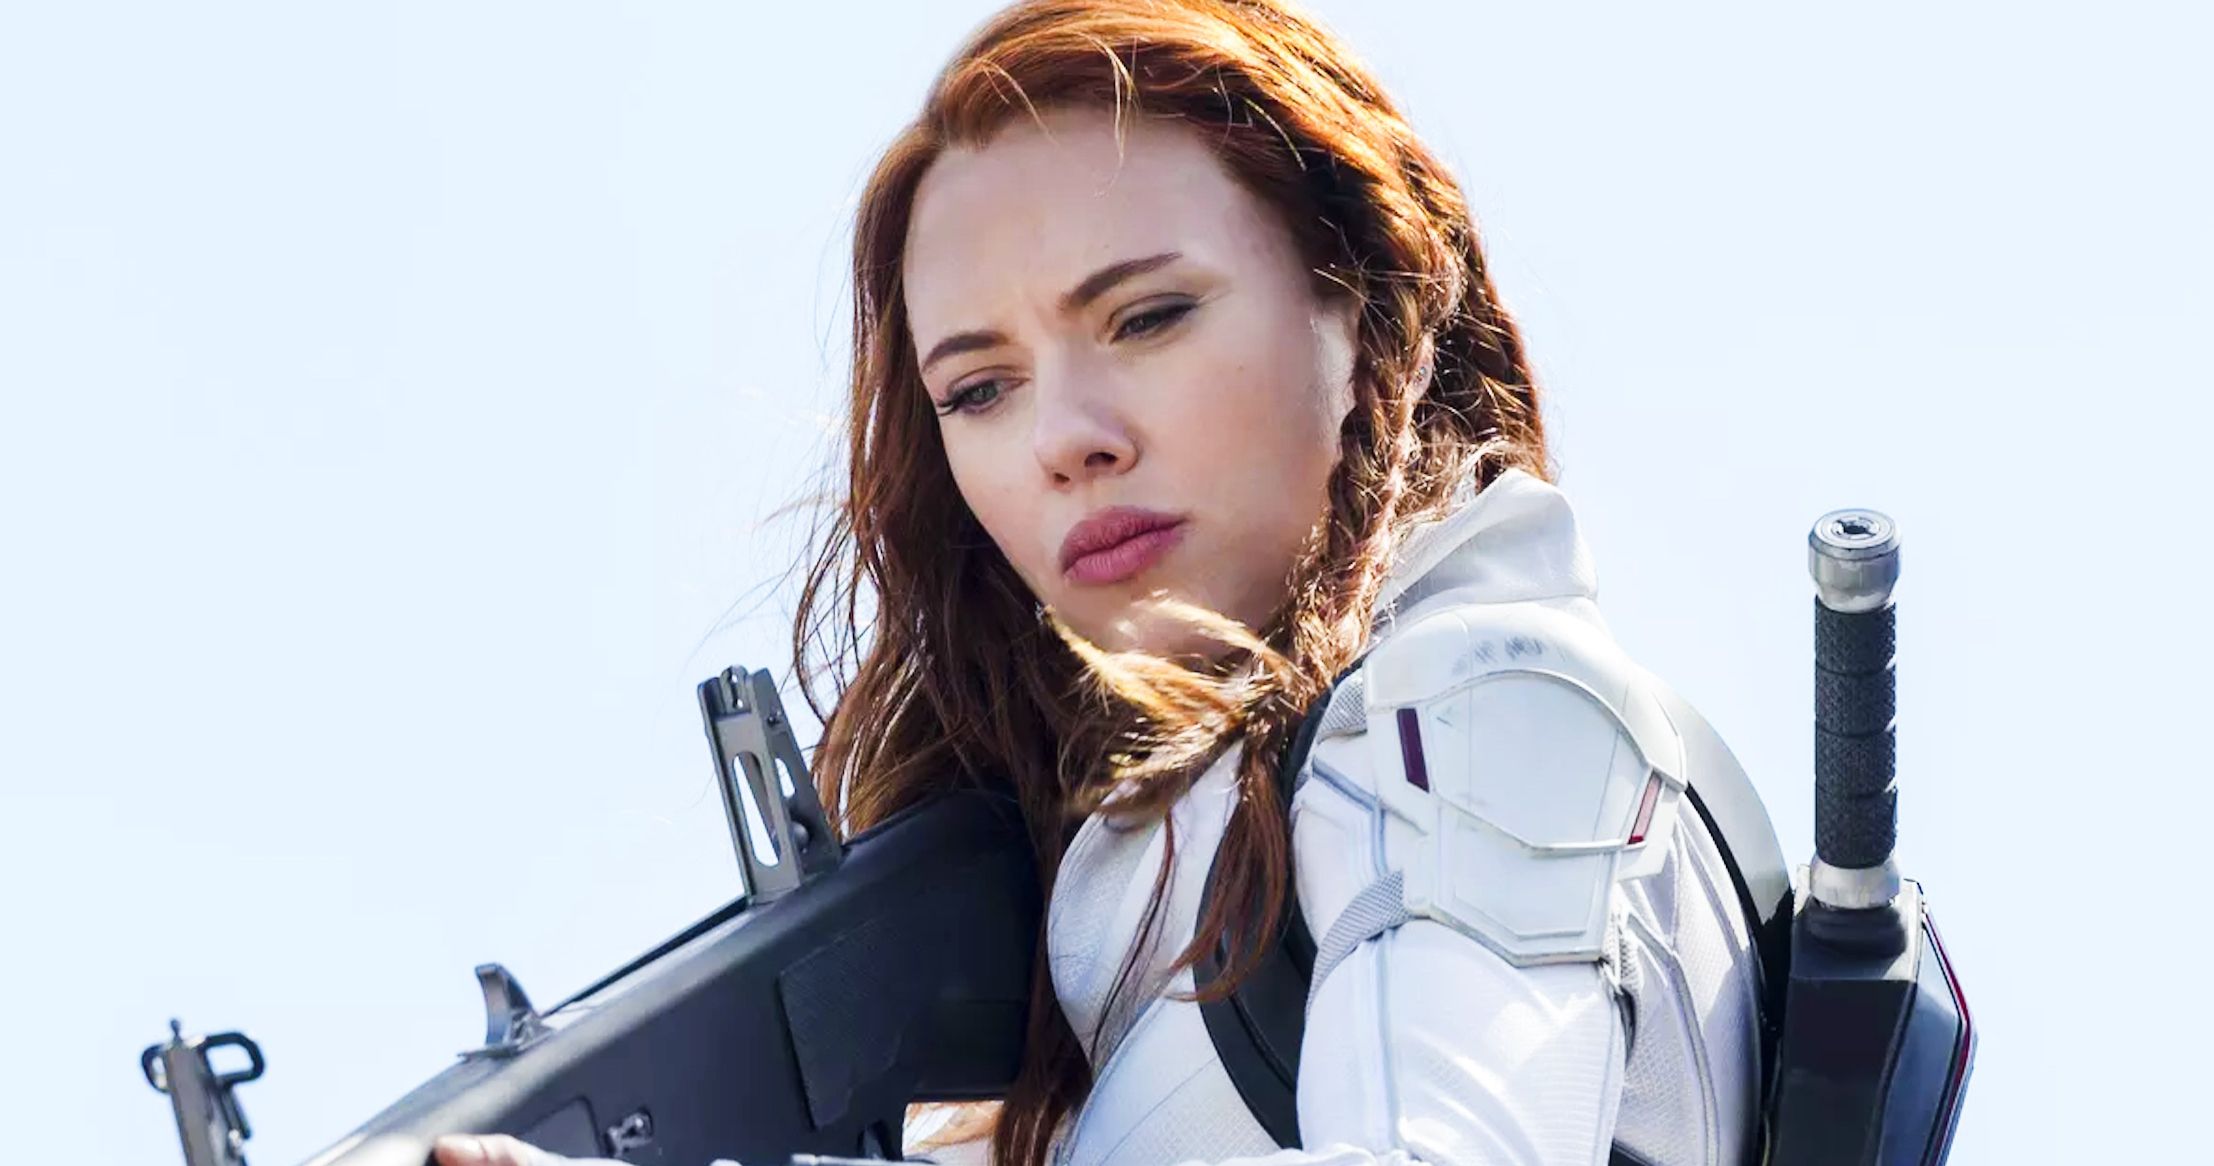 Black Widow Ticket Pre-Sales Are Outpacing Doctor Strange &amp; Spider-Man: Homecoming